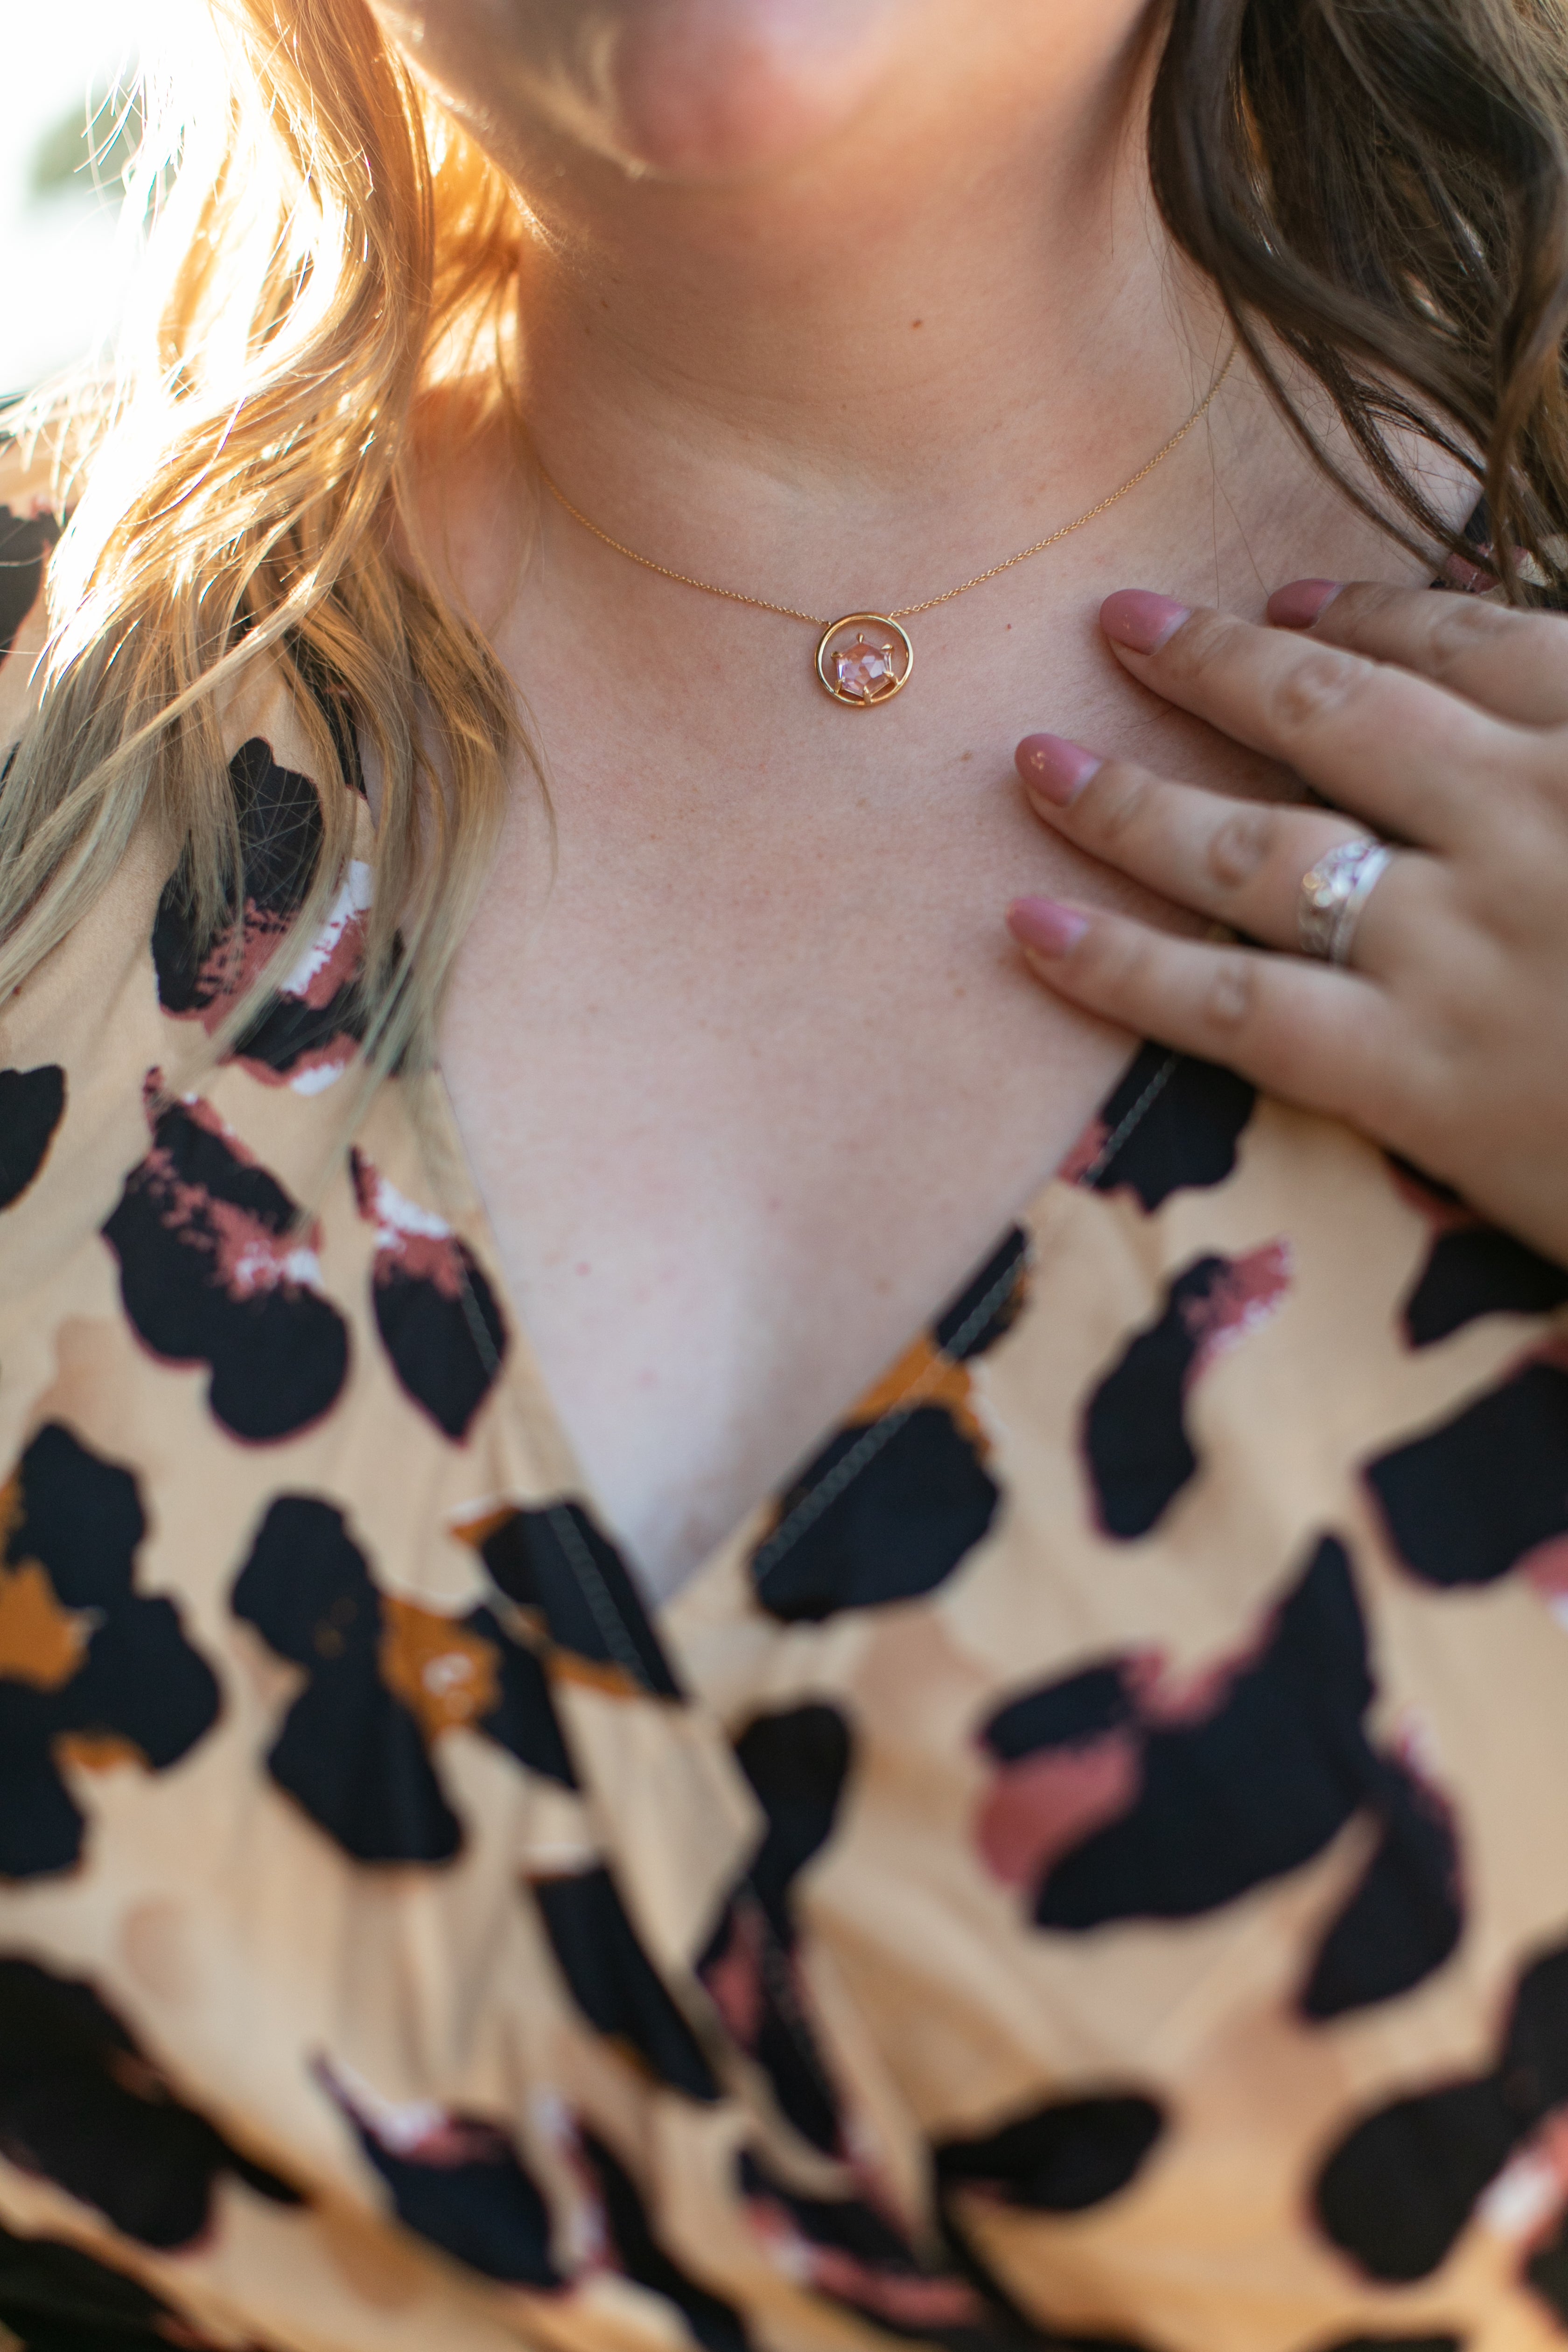 an image of a woman's neck with a gemstone necklace in gold and pink spinel on. She is wearing a leopard print dress.